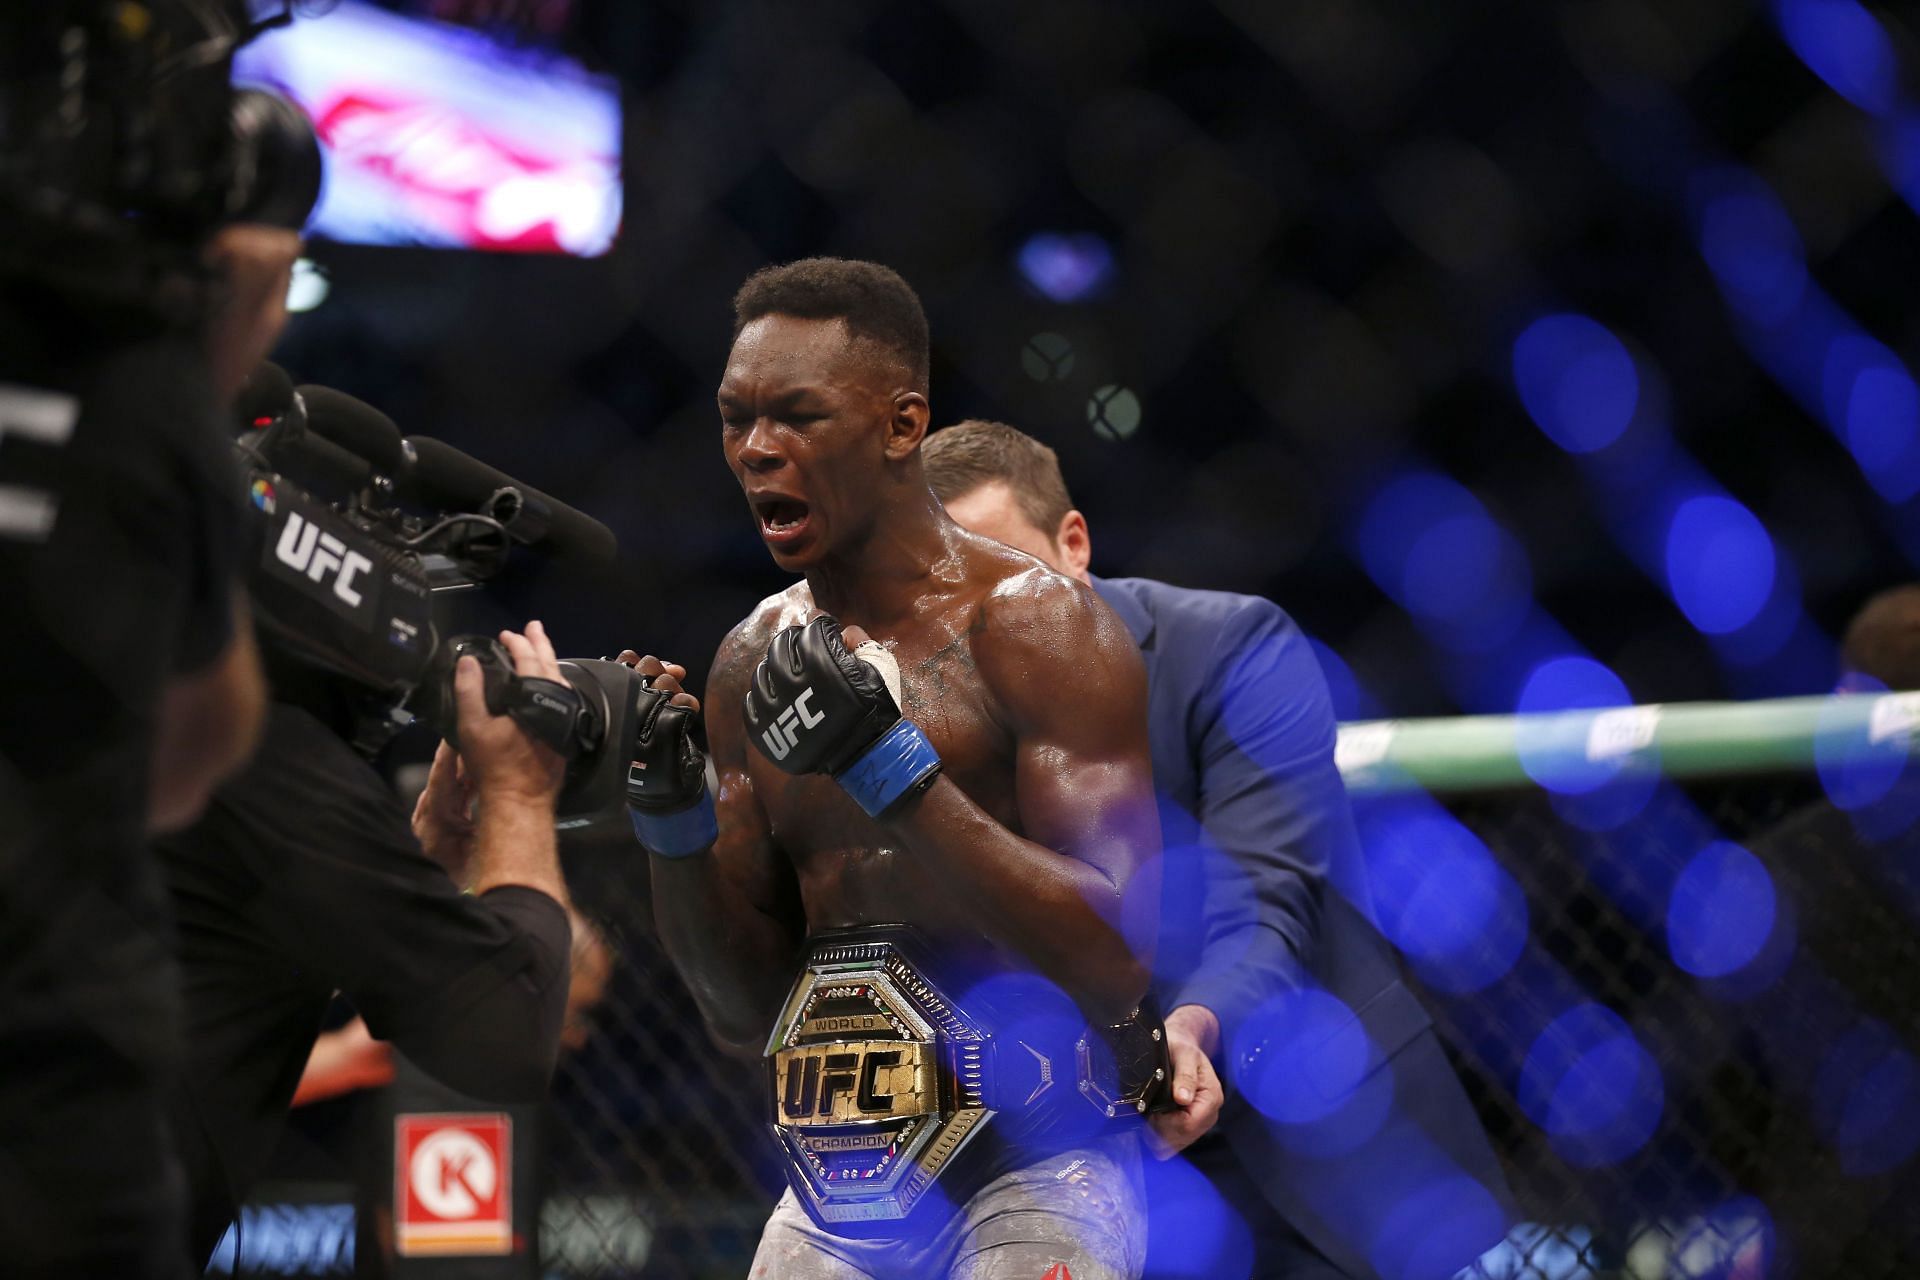 Israel Adesanya is the greatest UFC fighter to hail from Down Under